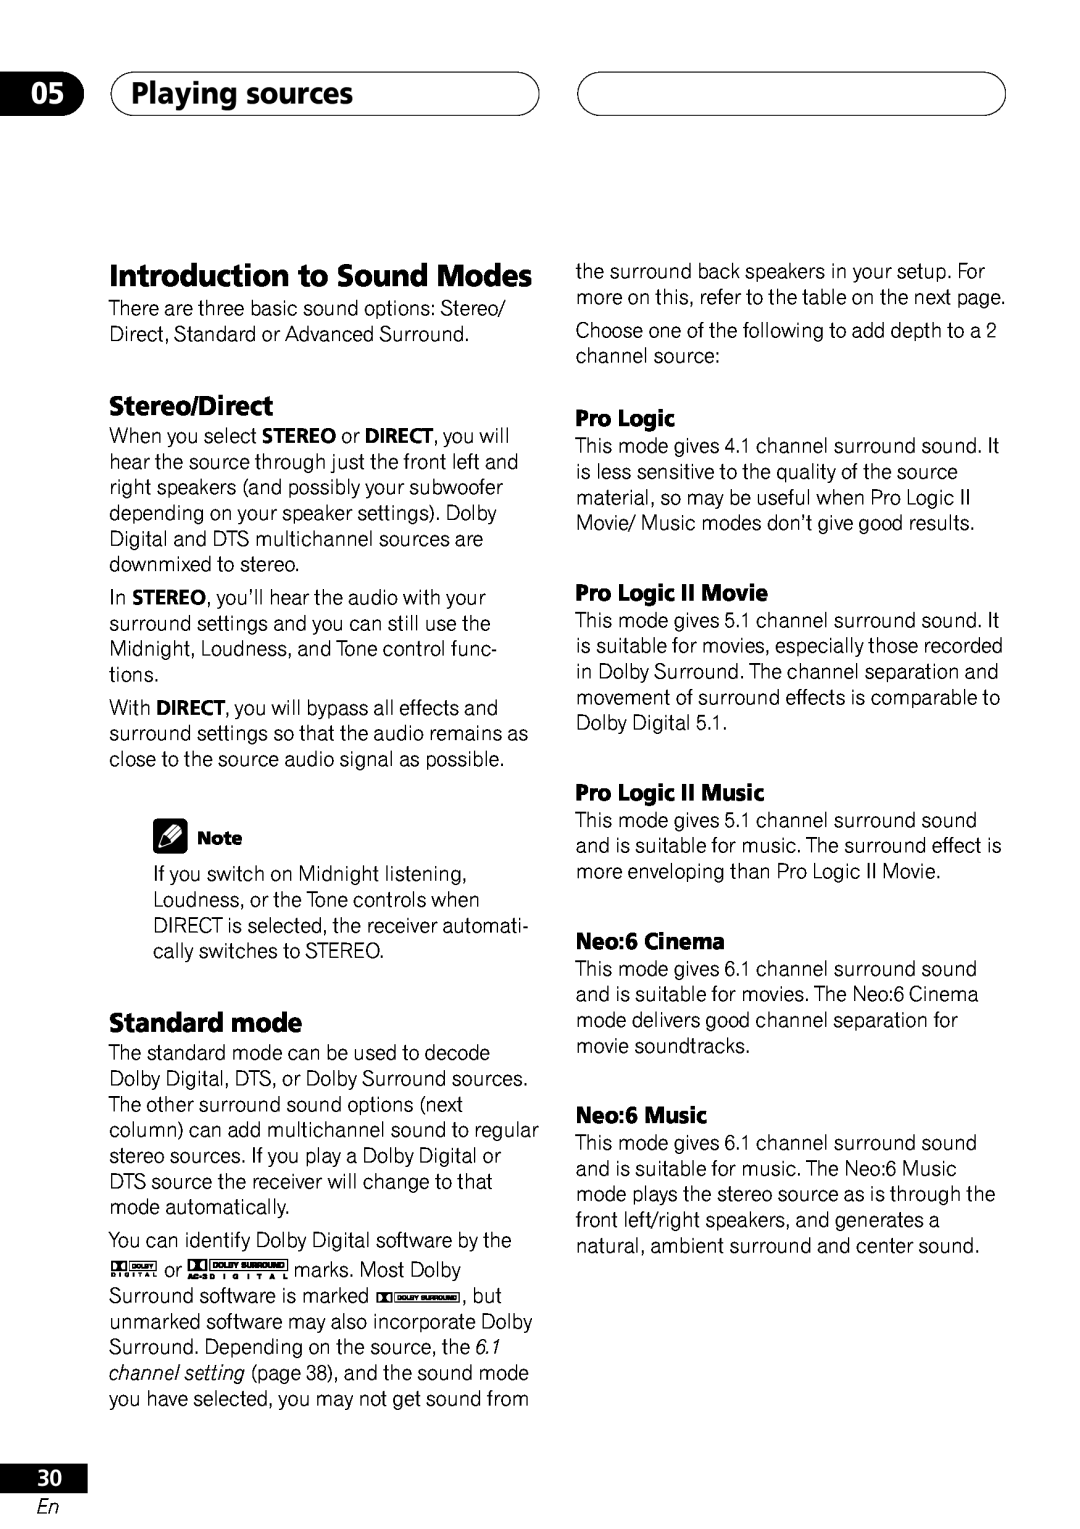 Pioneer VSX-41 manual 05Playing sources Introduction to Sound Modes, Stereo/Direct, Standard mode, Pro Logic II Movie 